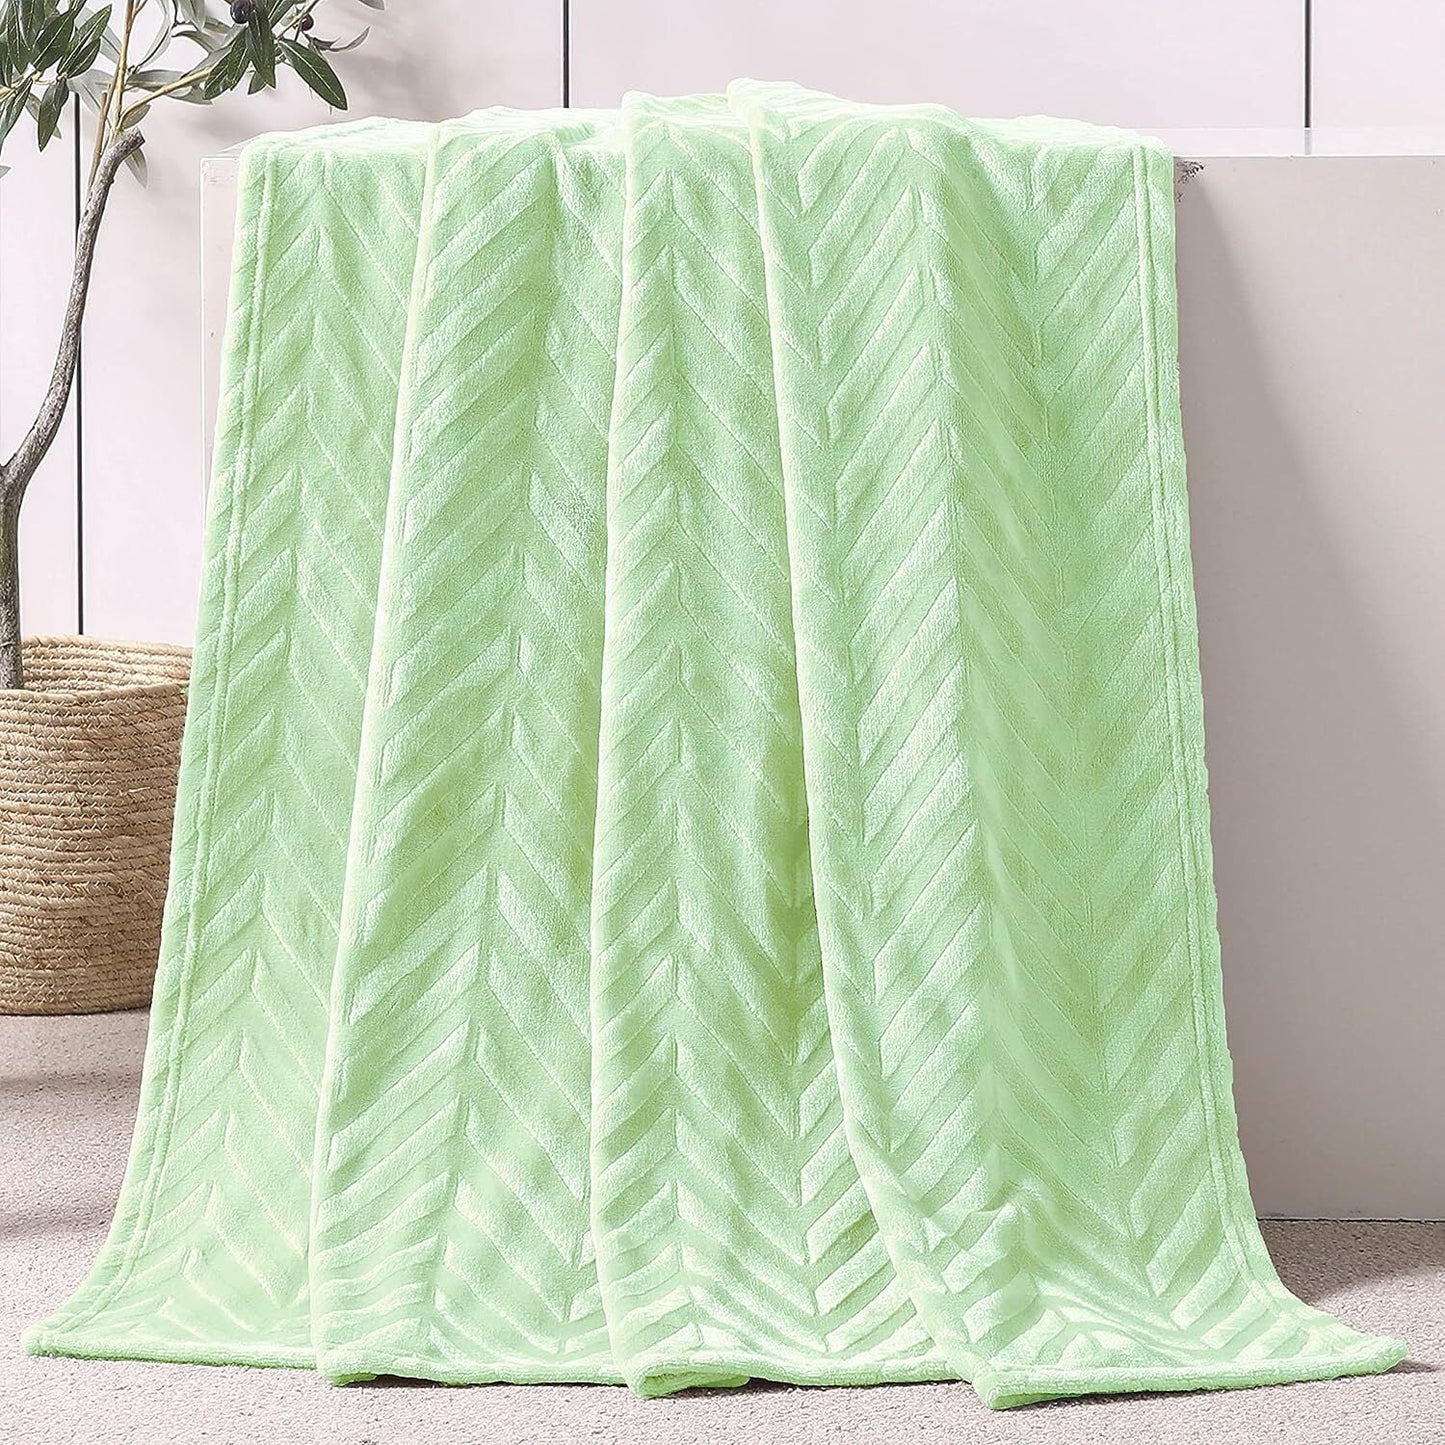 Whale Flotilla Fleece Throw Blanket for Couch, Soft Fluffy Sofa Bed Blanket with Chevron Pattern for All Season, Warm and Lightweight, 50x60 Inch, Light Green